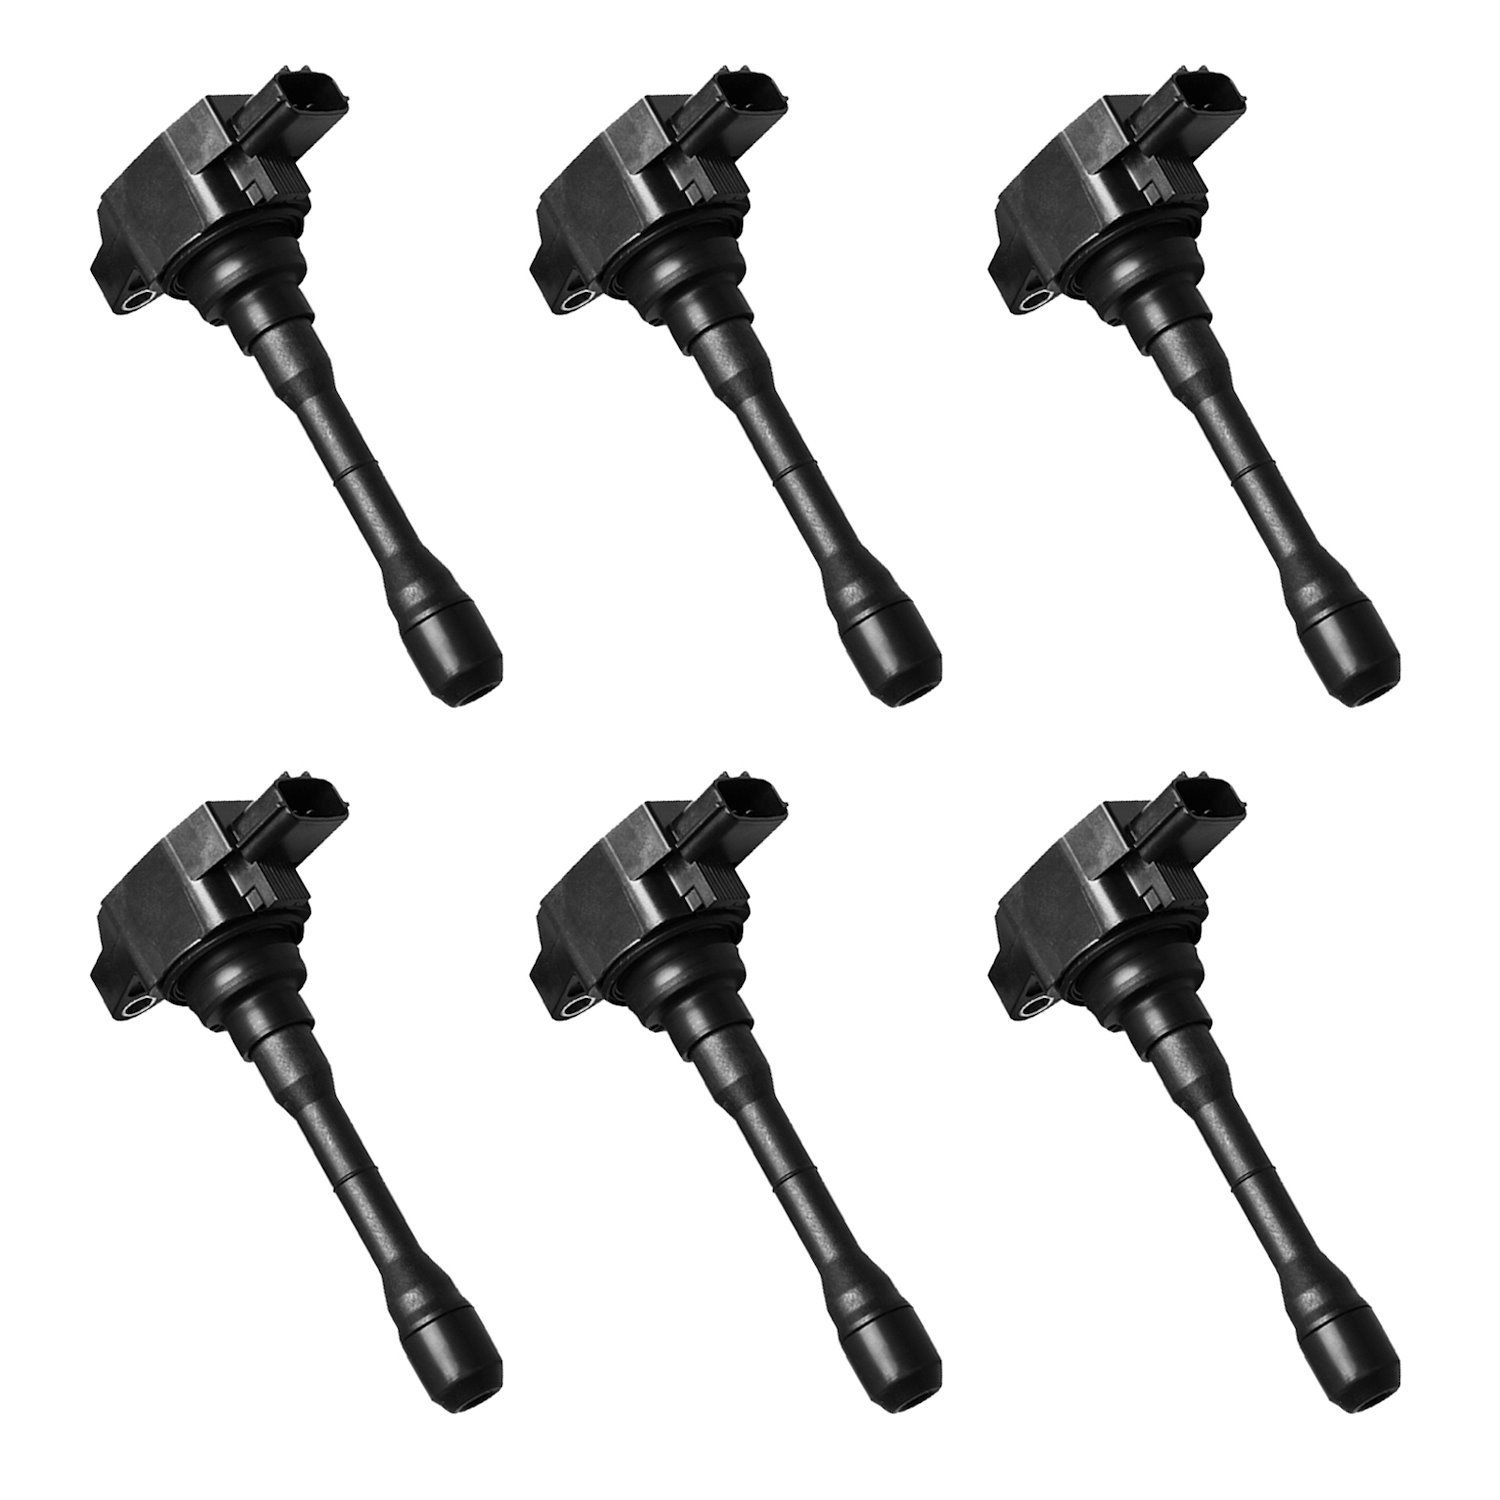 OE Replacement Ignition Coils for 3.0L V6 Infinity Q50 Q60